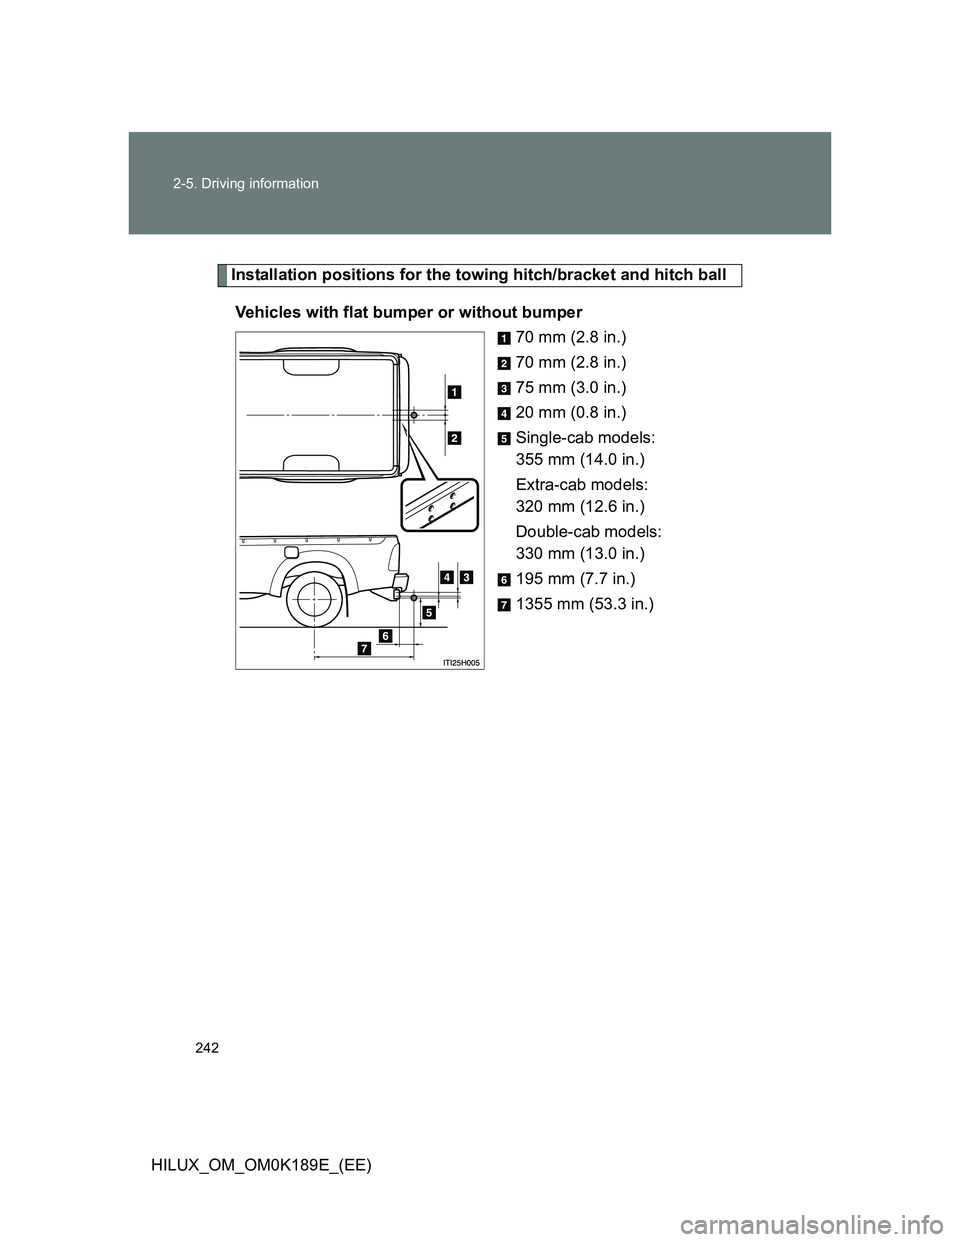 TOYOTA HILUX 2013  Owners Manual (in English) 242 2-5. Driving information
HILUX_OM_OM0K189E_(EE)
Installation positions for the towing hitch/bracket and hitch ball
Vehicles with flat bumper or without bumper
70 mm (2.8 in.)
70 mm (2.8 in.)
75 mm